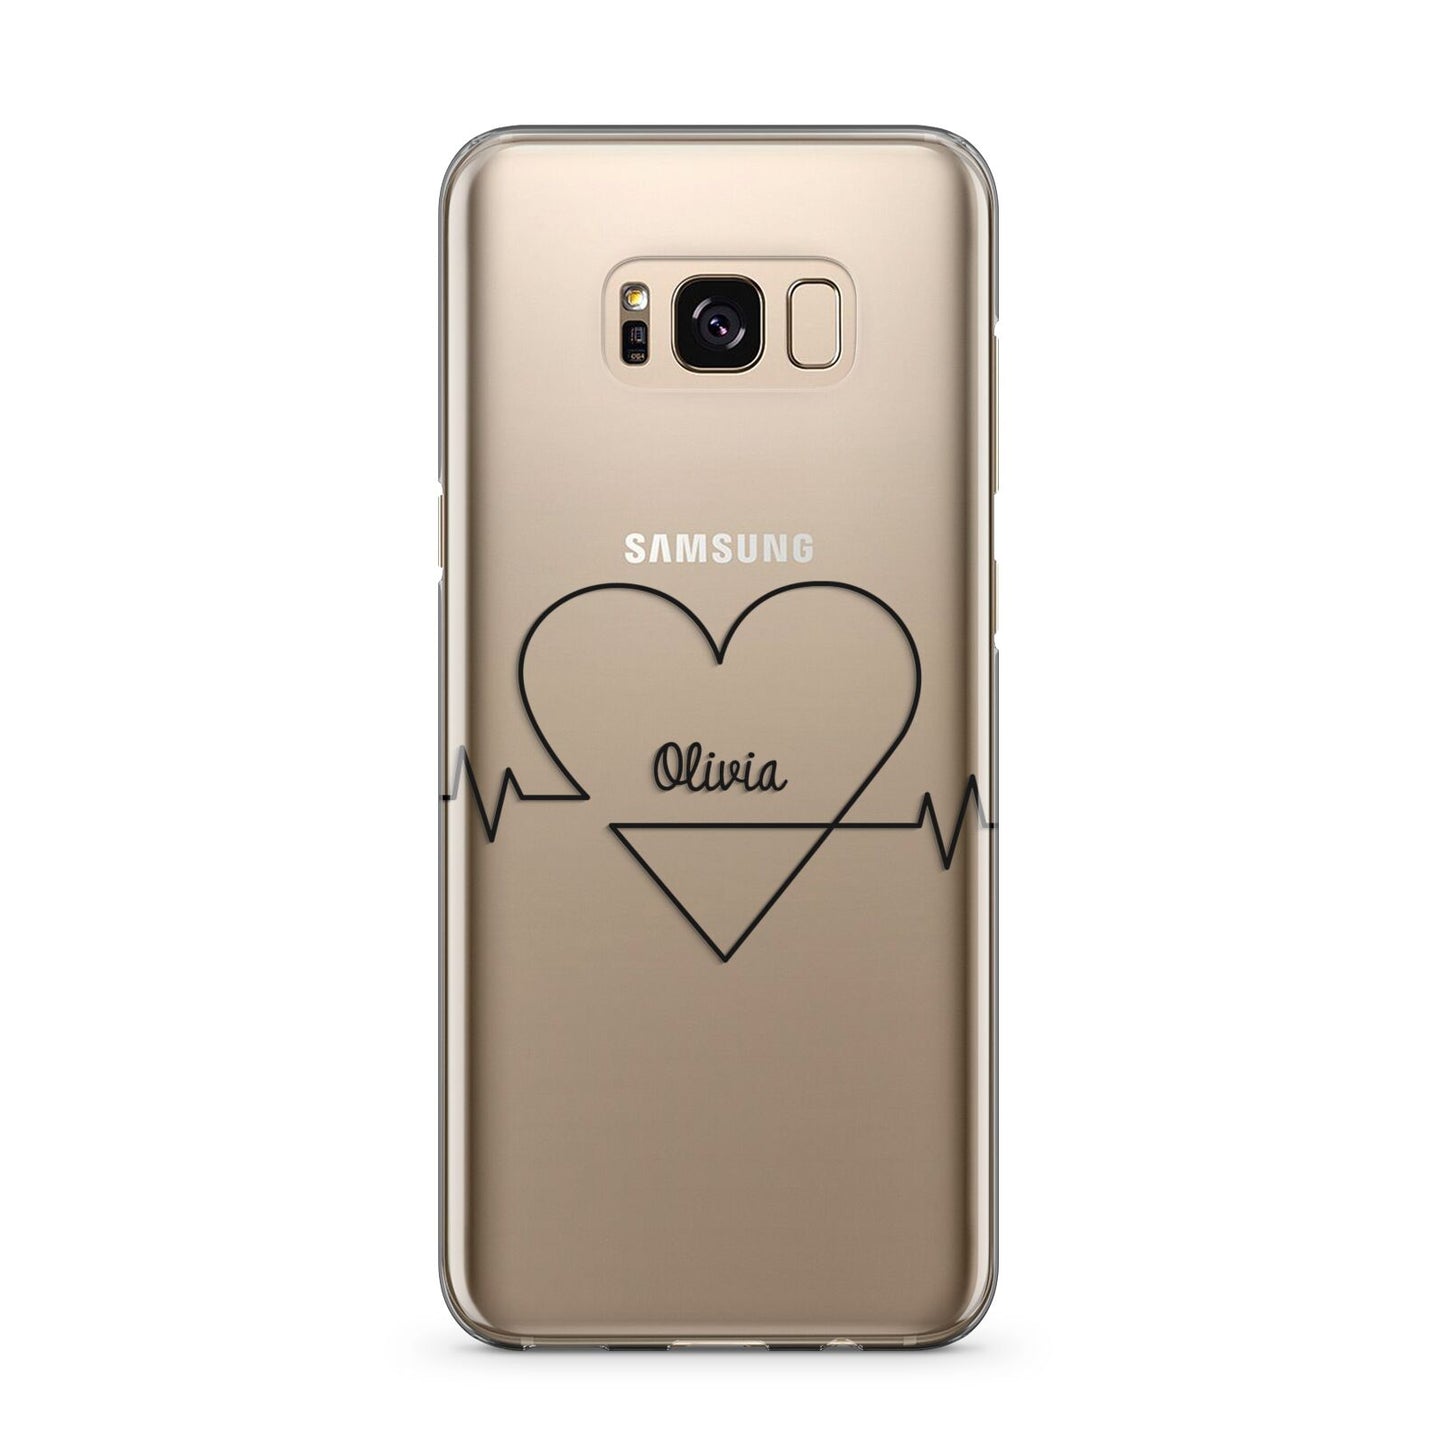 ECG Effect Heart Beats with Name Samsung Galaxy S8 Plus Case